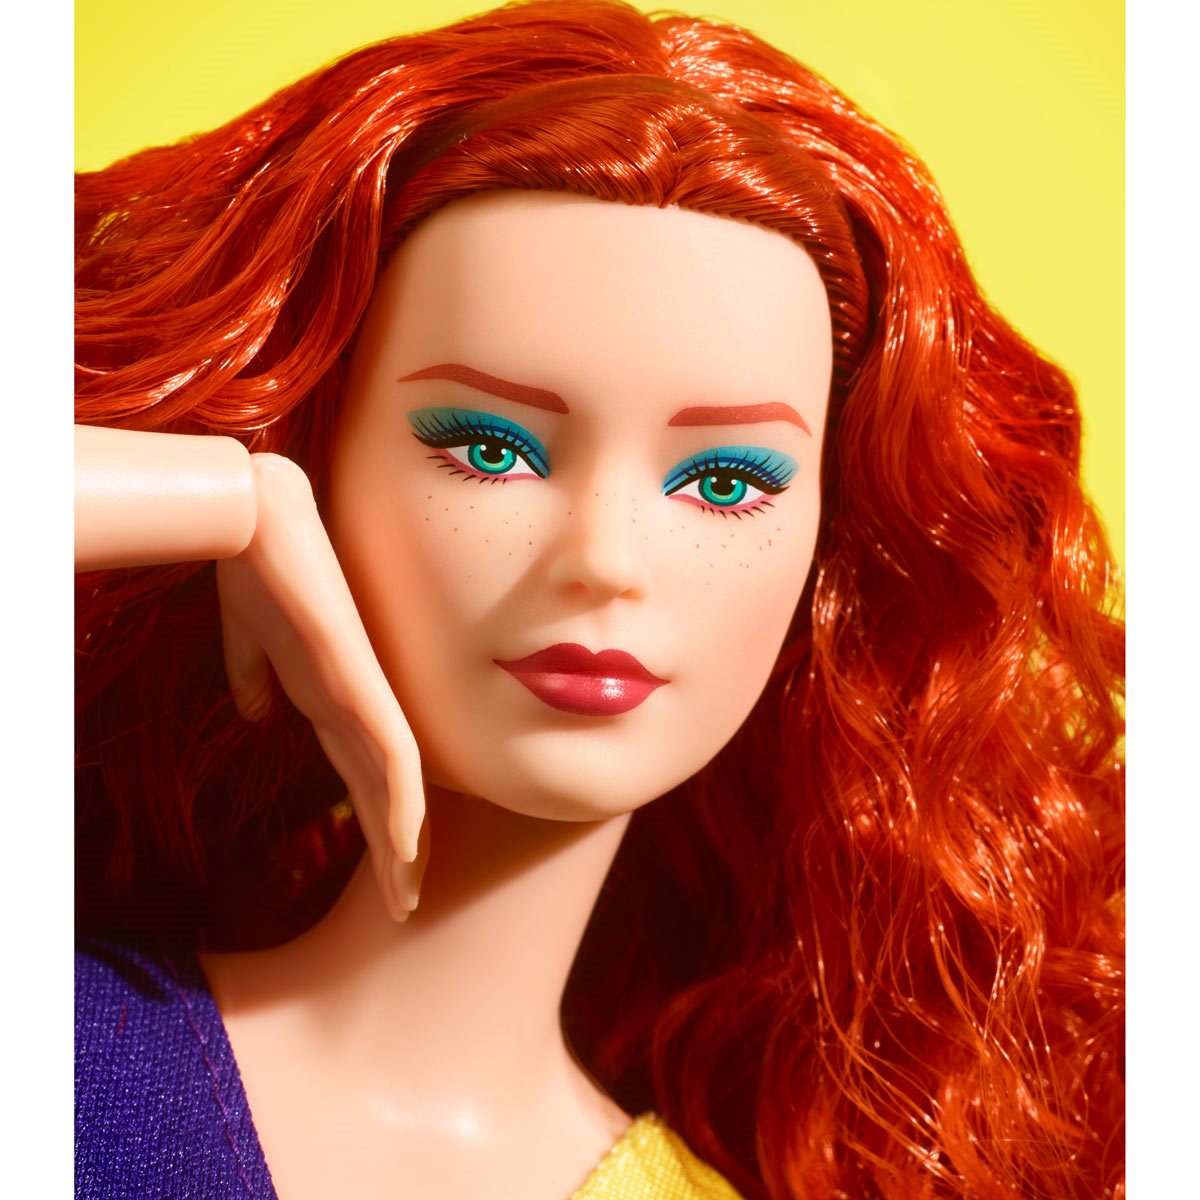 klep Maria Maan Barbie Looks Doll #13 with Red Hair - Entertainment Earth